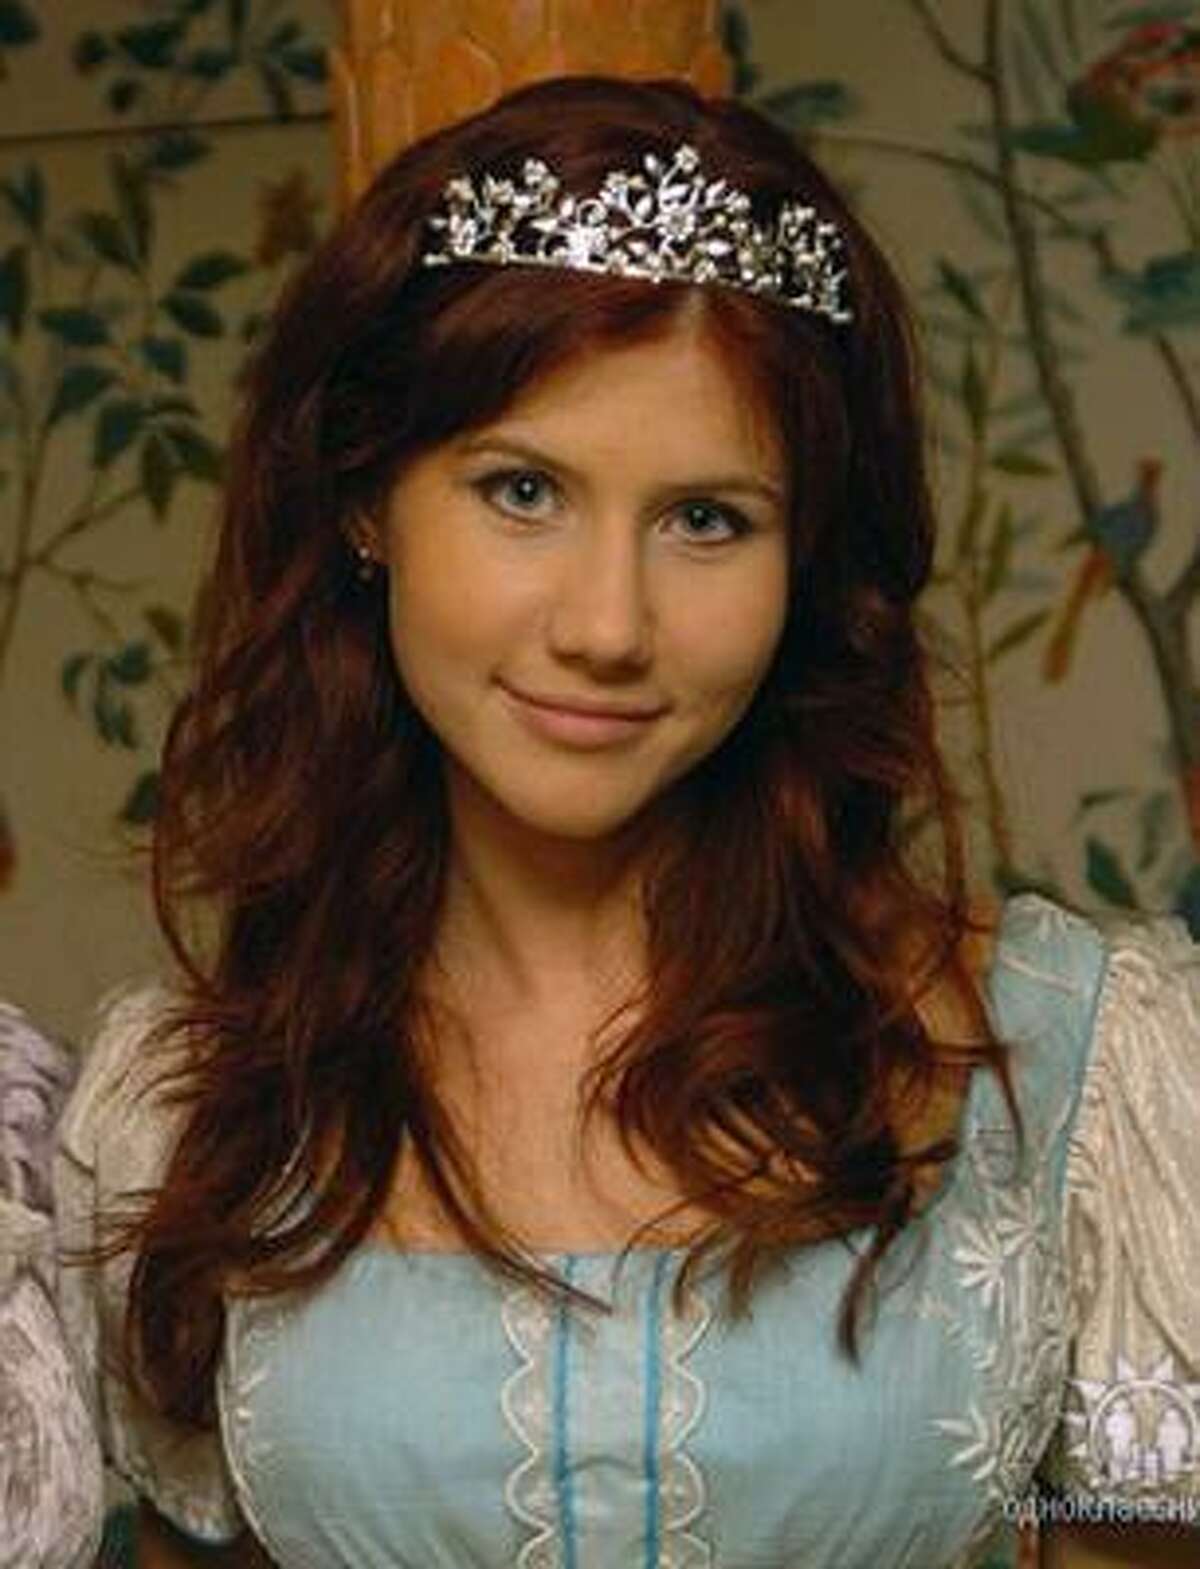 This undated image taken from the Russian social networking website "Odnoklassniki", or Classmates, shows a woman journalists have identified as Anna Chapman, who appeared at a hearing Monday, June 28, 2010 in New York federal court.